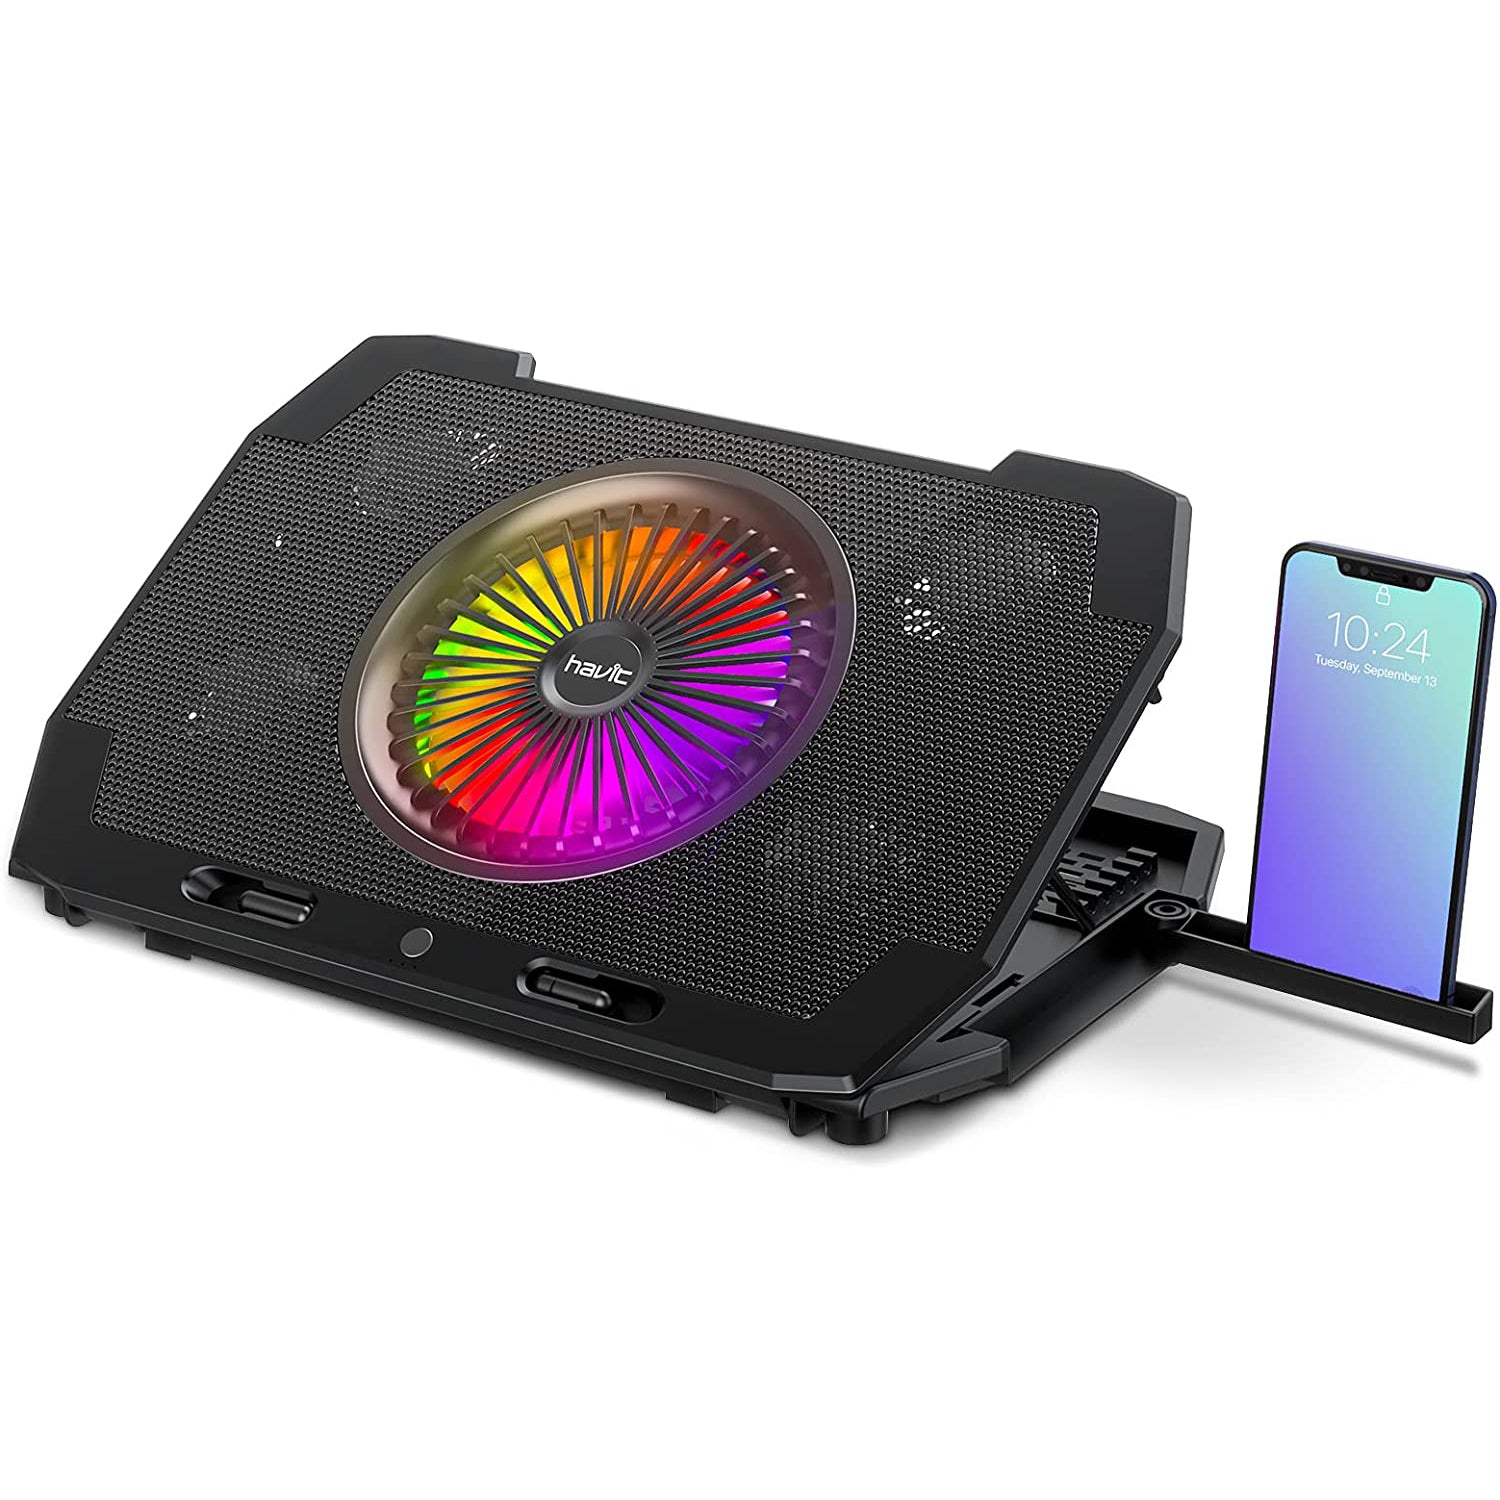 HAVIT G90 RGB Laptop Cooling Pad for 13-17.3 Inch Laptop with Phone Stand & 6 Height Adjustable Cooling Stand